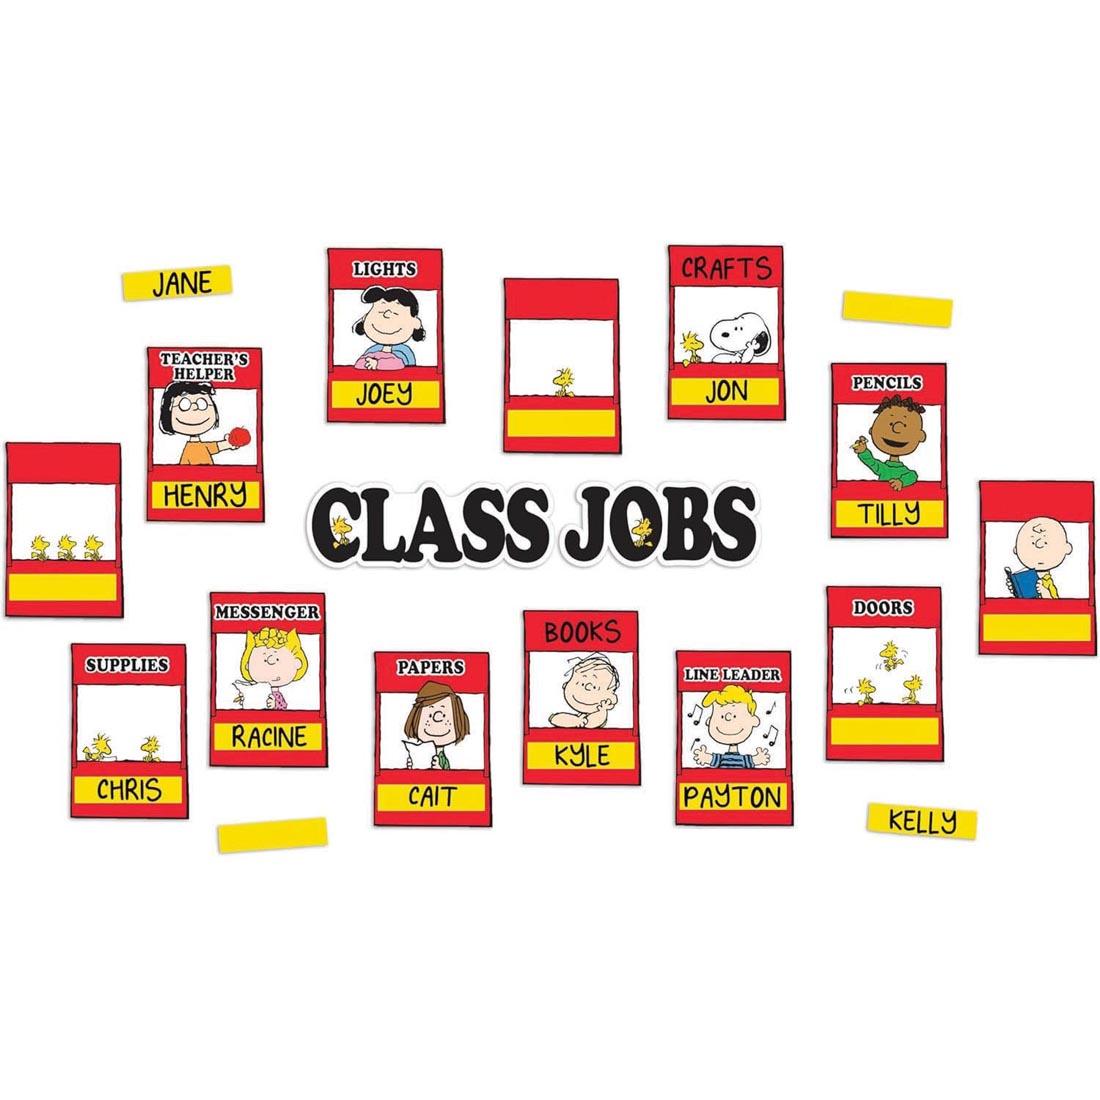 Class Jobs Mini Bulletin Board Set from the Peanuts collection by Eureka